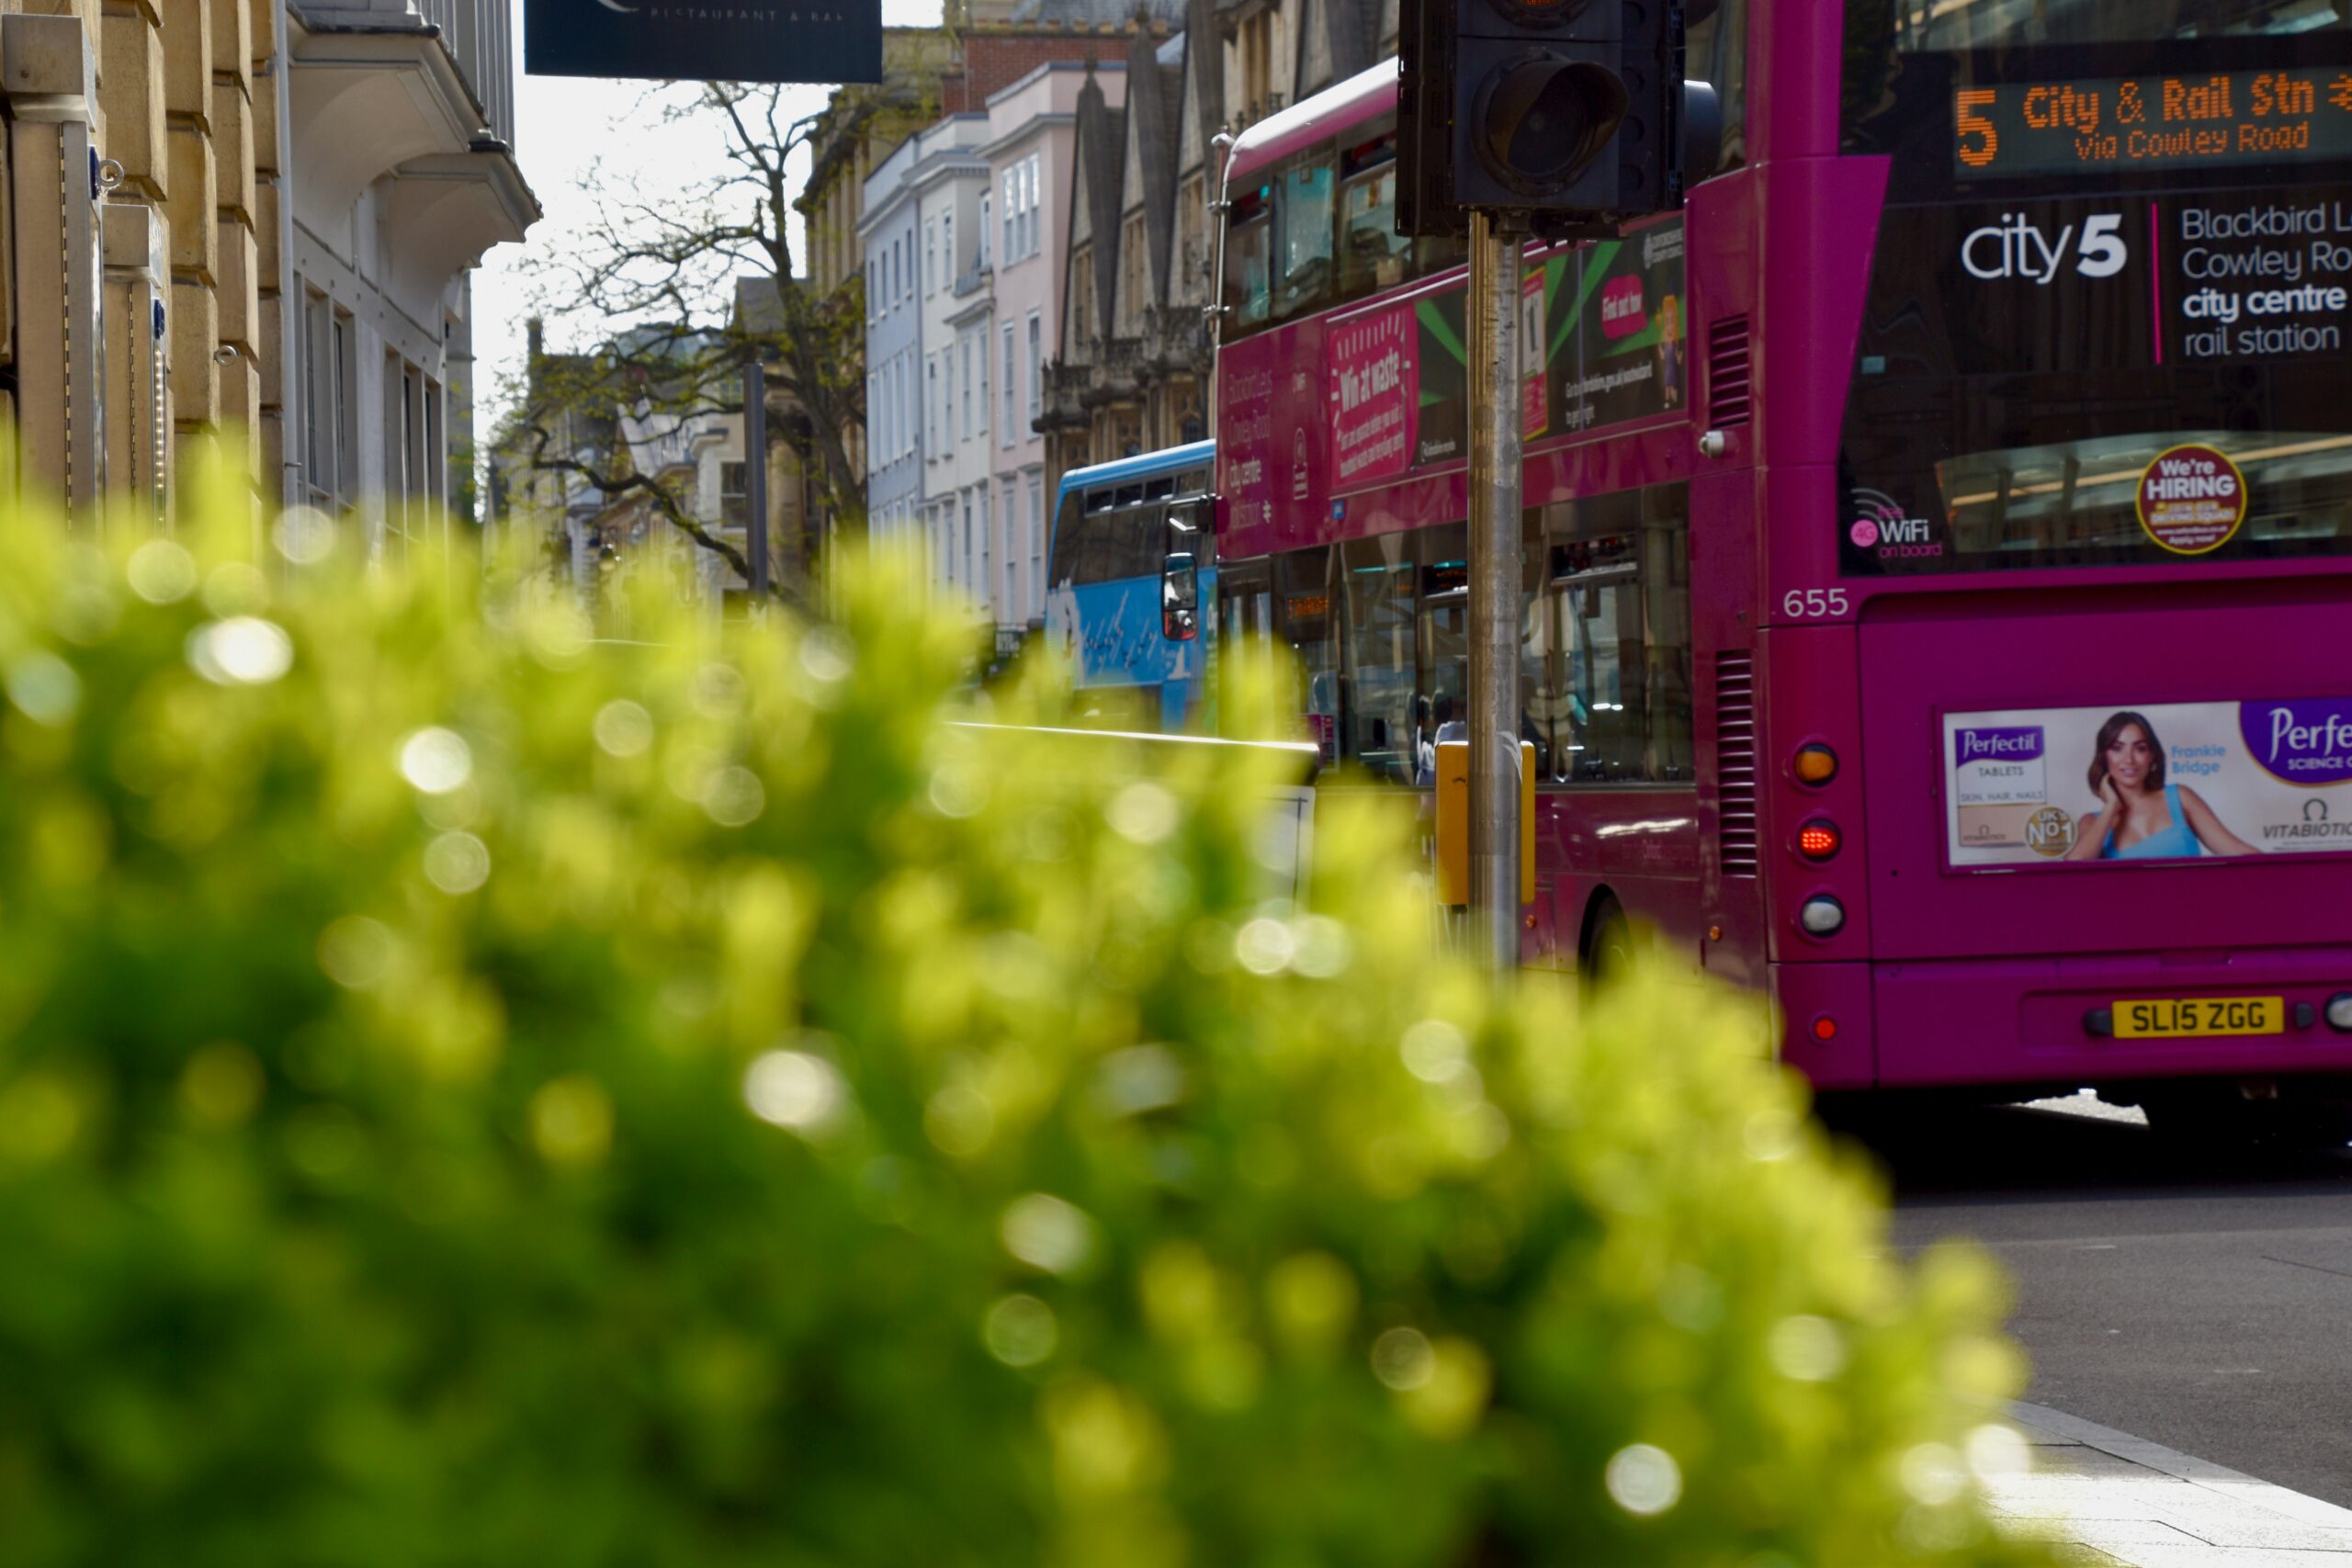 Image of a bus and plants in Oxford by Samuel Isaacs